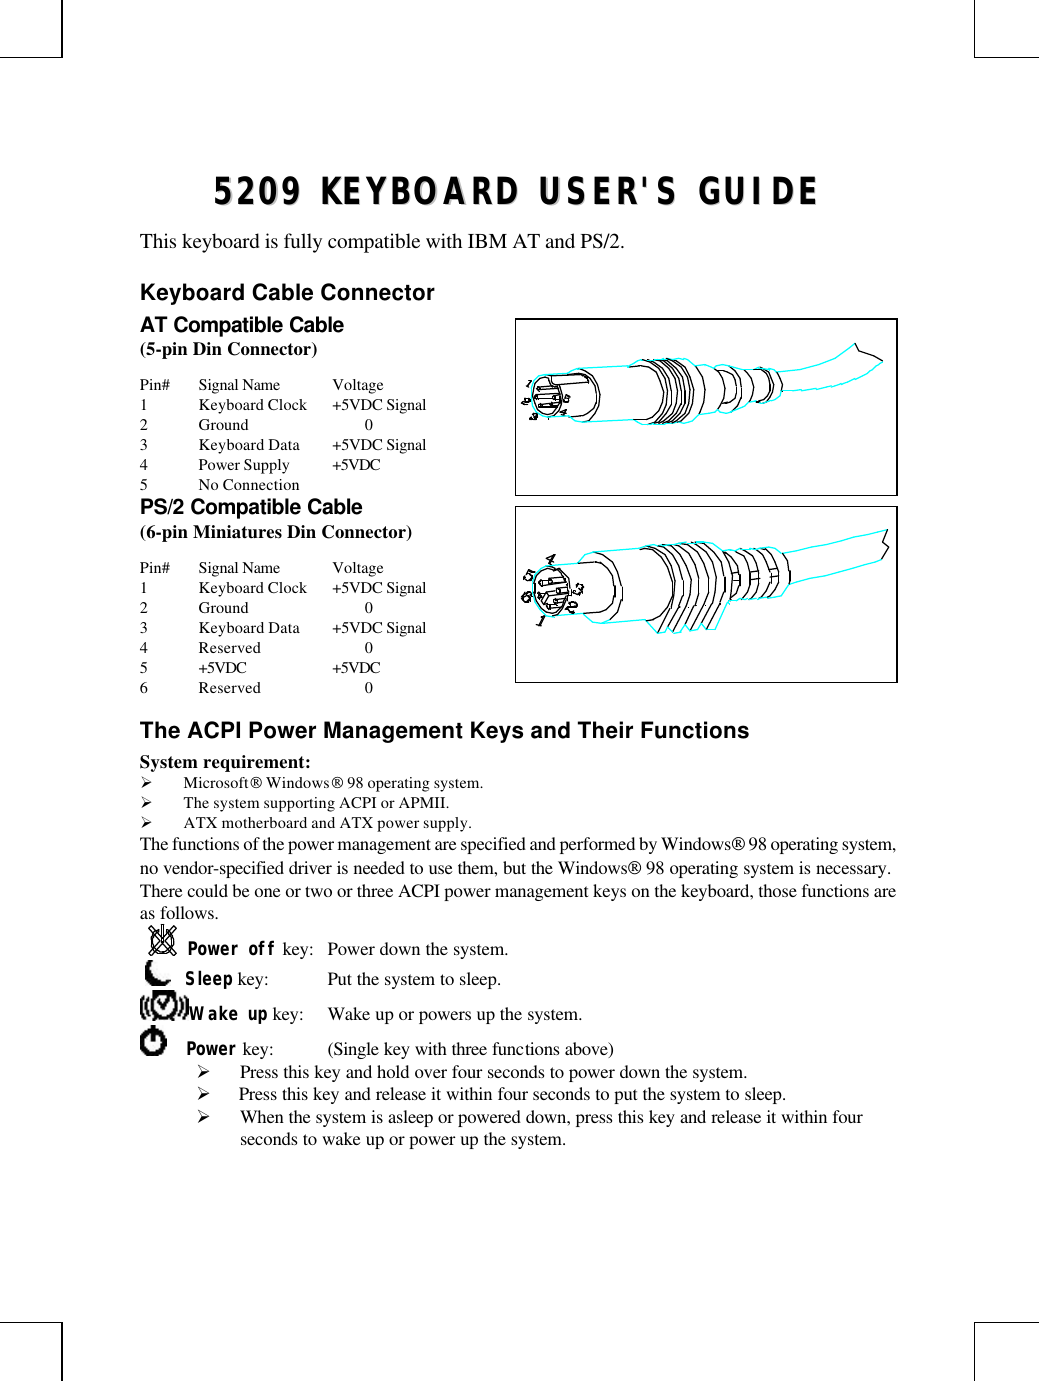 55220099  KKEEYYBBOOAARRDD  UUSSEERR&apos;&apos;SS  GGUUIIDDEEThis keyboard is fully compatible with IBM AT and PS/2.Keyboard Cable ConnectorAT Compatible Cable(5-pin Din Connector)Pin# Signal Name Voltage1Keyboard Clock +5VDC Signal2Ground 03Keyboard Data +5VDC Signal4Power Supply +5VDC5No ConnectionPS/2 Compatible Cable(6-pin Miniatures Din Connector)Pin# Signal Name Voltage1Keyboard Clock +5VDC Signal2Ground 03Keyboard Data +5VDC Signal4Reserved 05+5VDC +5VDC6Reserved 0The ACPI Power Management Keys and Their FunctionsSystem requirement:Ø Microsoft Windows 98 operating system.Ø The system supporting ACPI or APMII.Ø ATX motherboard and ATX power supply.The functions of the power management are specified and performed by Windows 98 operating system,no vendor-specified driver is needed to use them, but the Windows 98 operating system is necessary.There could be one or two or three ACPI power management keys on the keyboard, those functions areas follows.Power off key: Power down the system.     Sleep key: Put the system to sleep.Wake up key: Wake up or powers up the system.    Power key: (Single key with three functions above)Ø Press this key and hold over four seconds to power down the system.Ø  Press this key and release it within four seconds to put the system to sleep.Ø When the system is asleep or powered down, press this key and release it within fourseconds to wake up or power up the system.